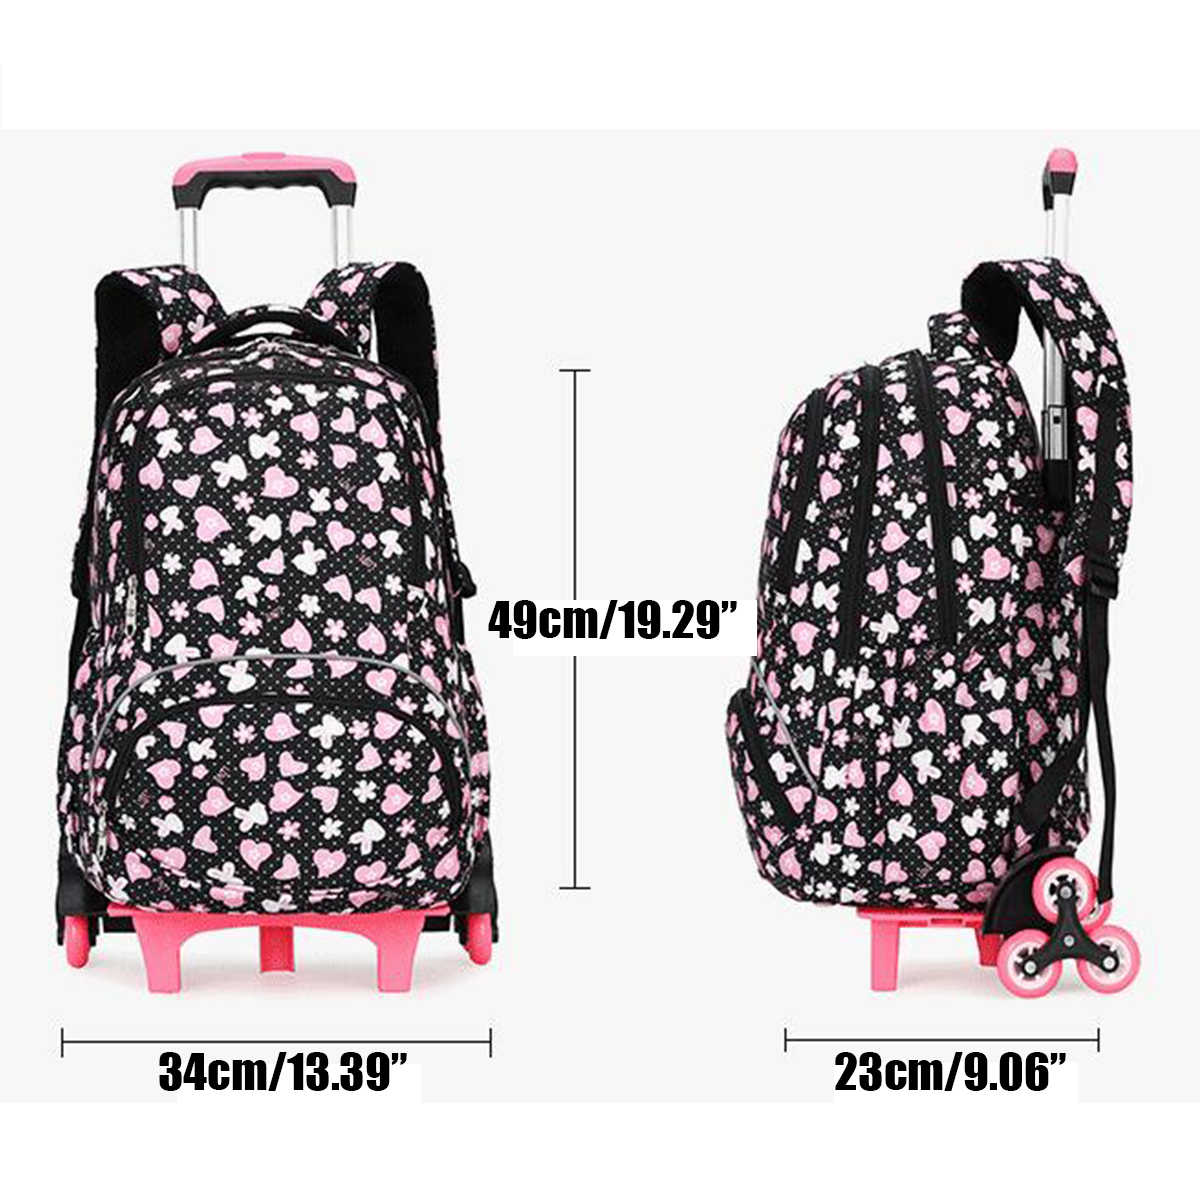 38L-6-Wheels-Removable-Luggage-Trolley-Backpack-Rucksack-Student-School-Bag-Outdoor-Travel-1555964-9